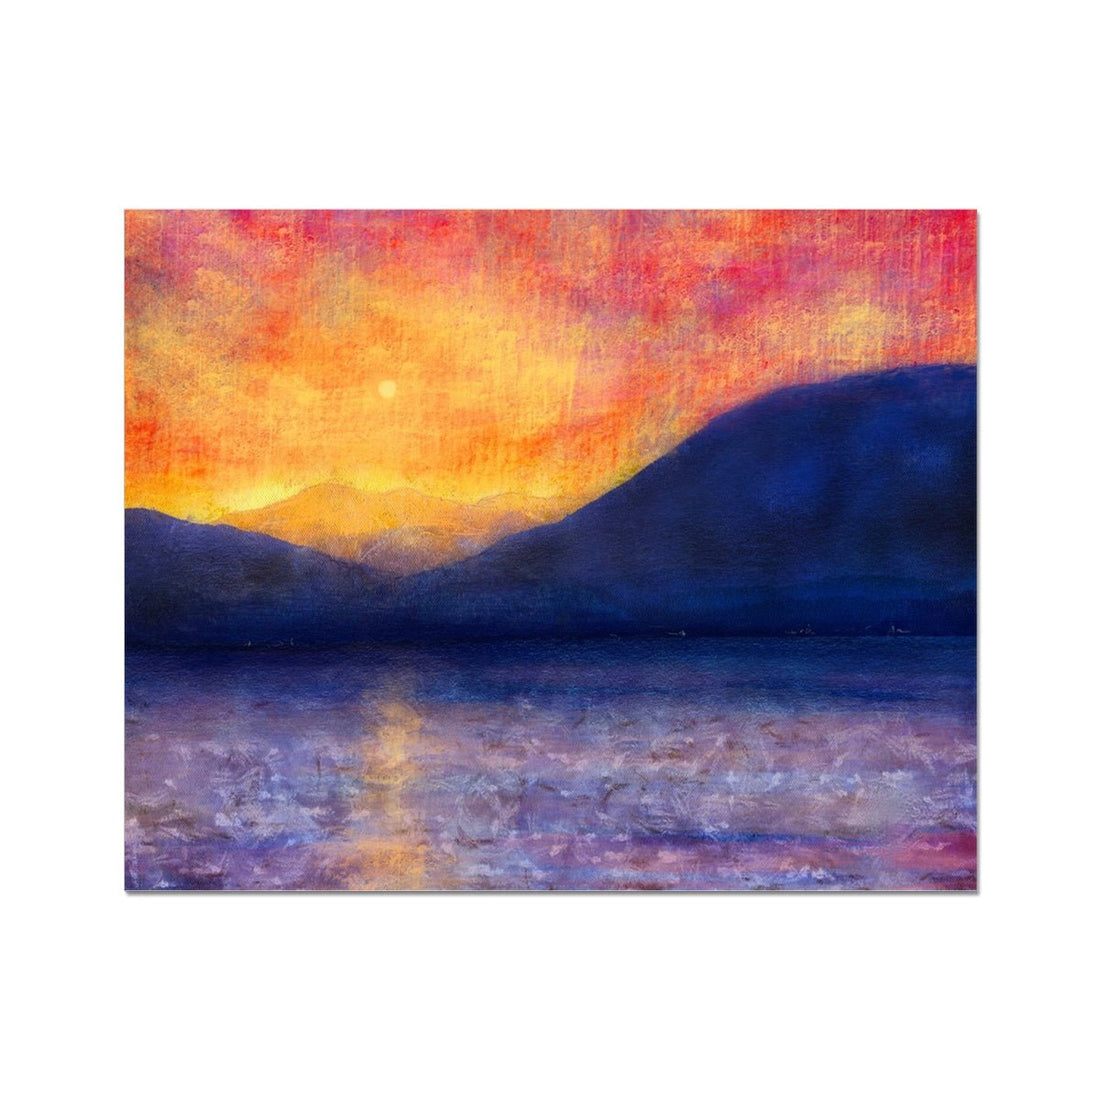 Sunset Approaching Mull Painting | Artist Proof Collector Print | Paintings from Scotland by Scottish Artist Hunter